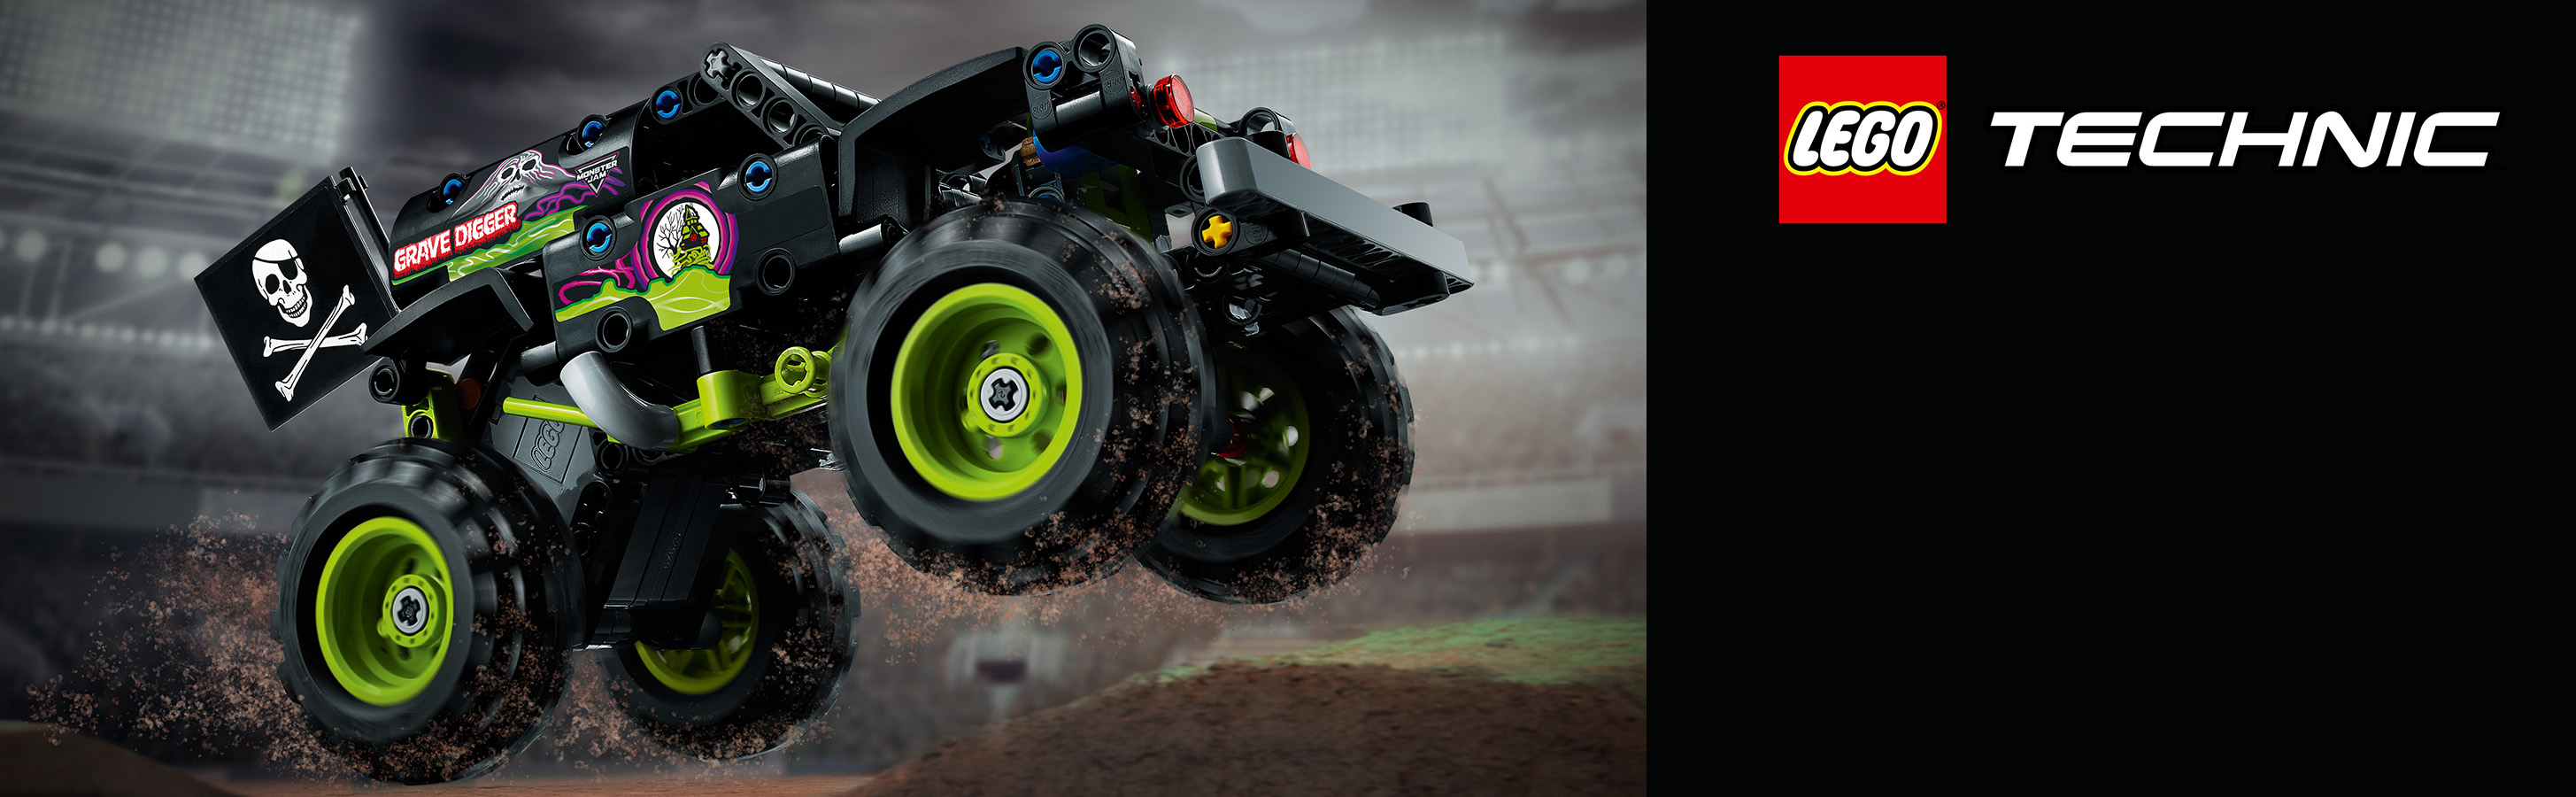 The perfect gift for monster truck fans